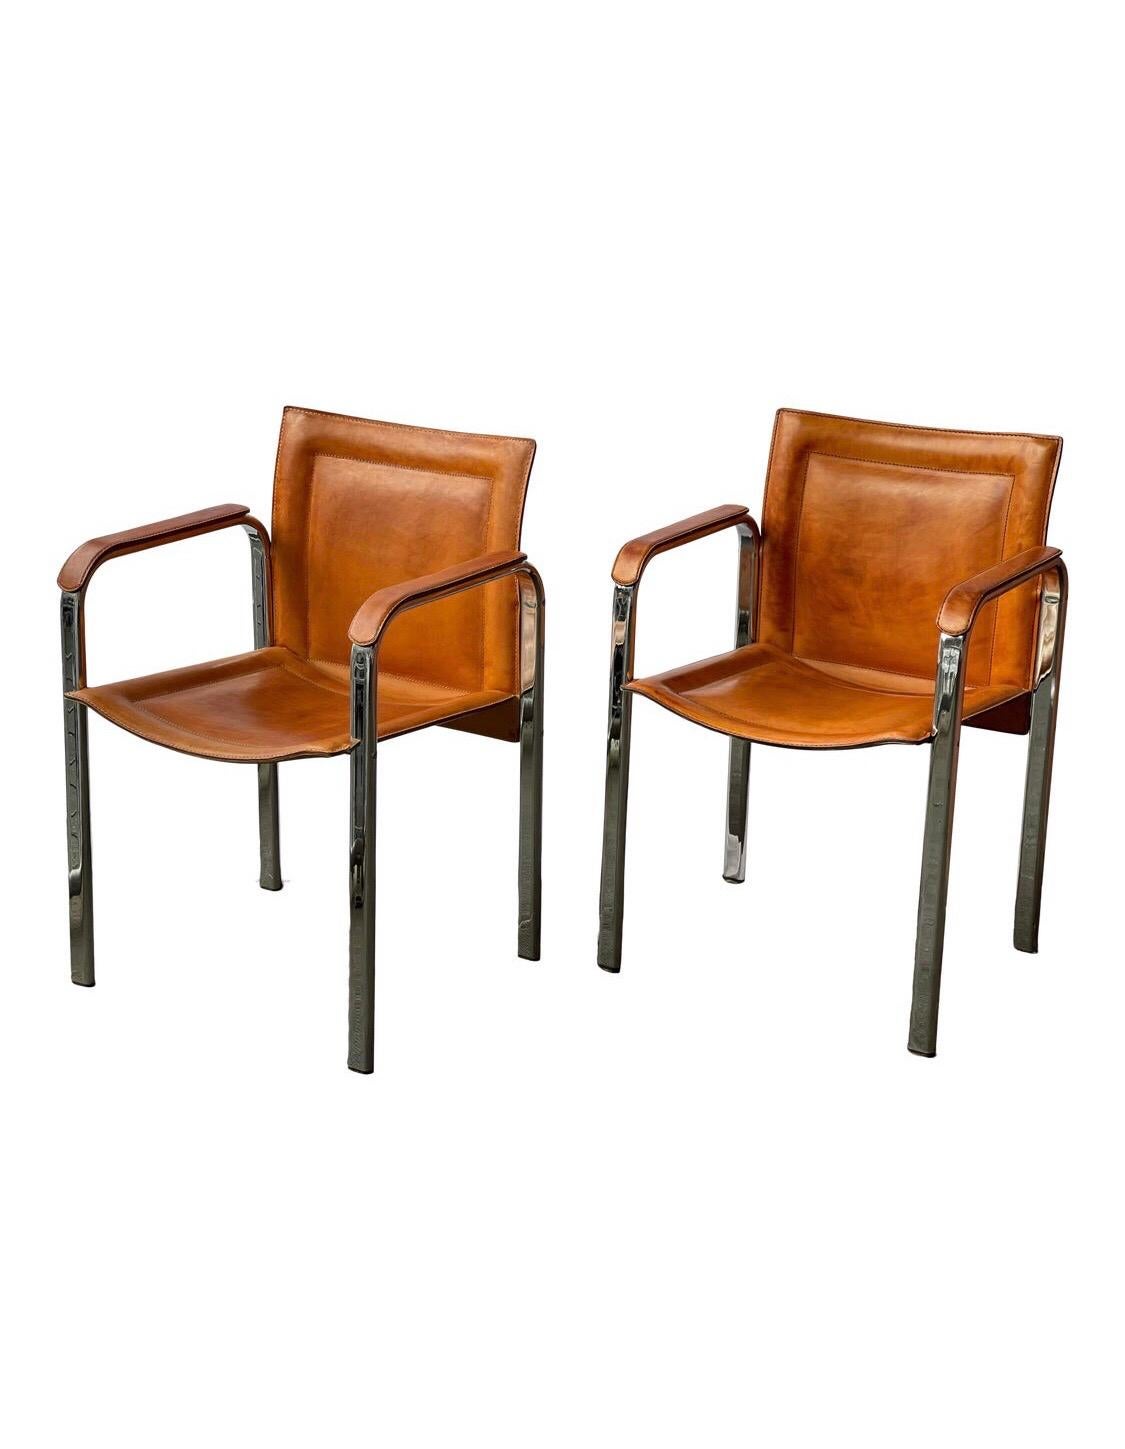 Swedish Mid-Century Modern Leather Chrome Accent Chairs, a Pair